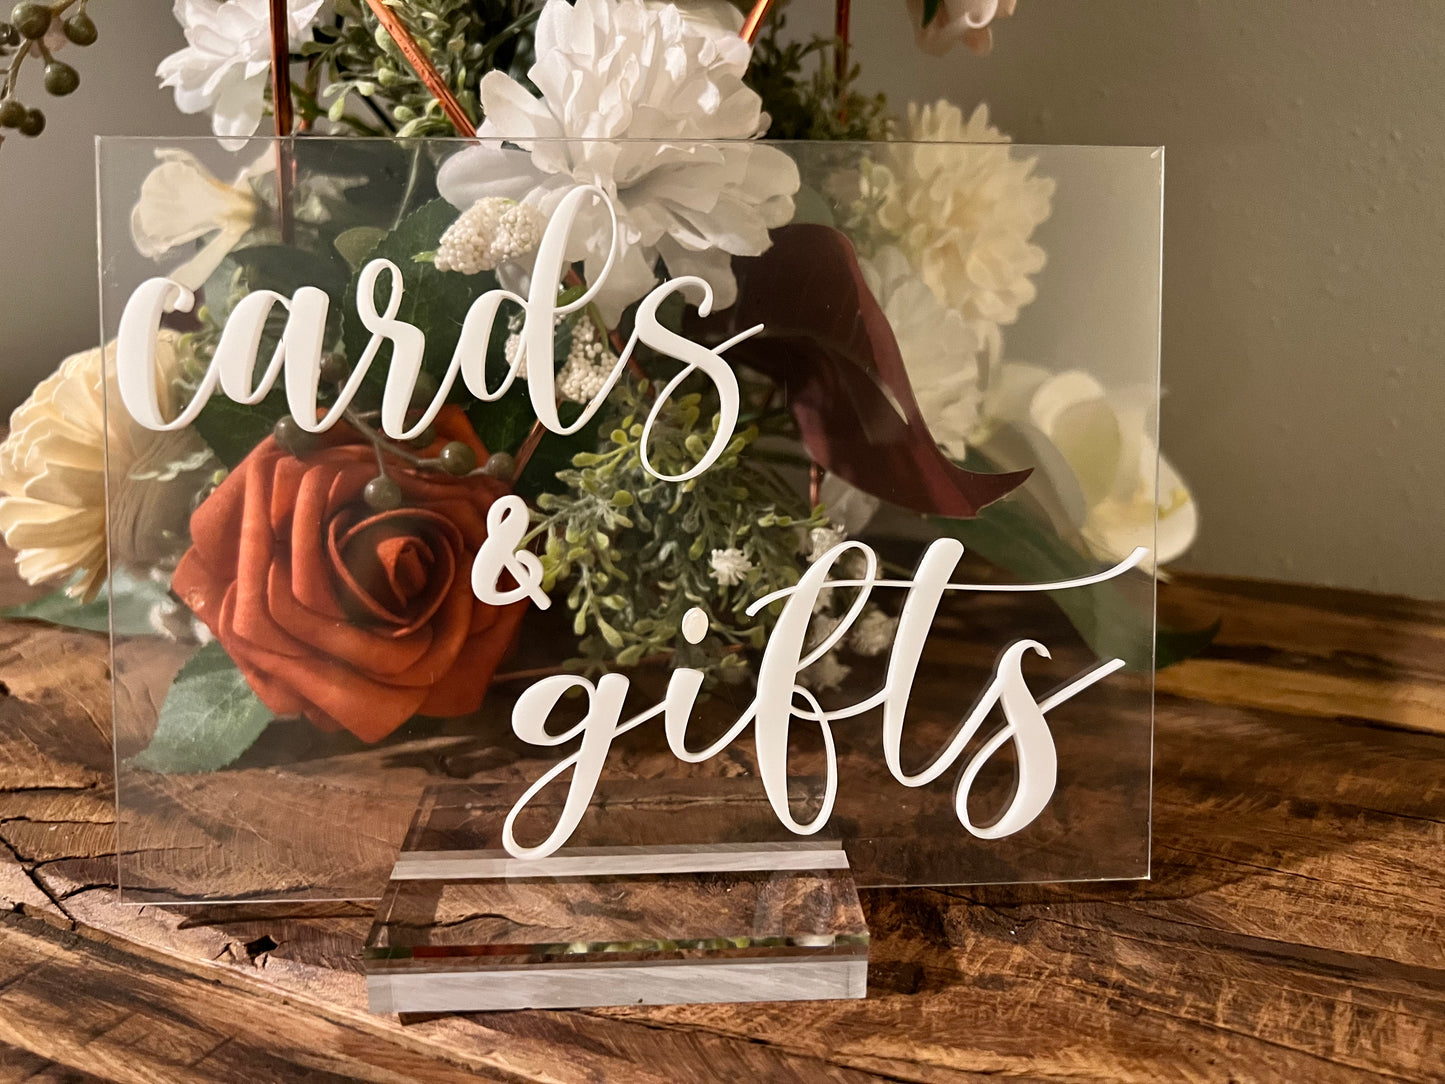 Custom Cards and Gifts